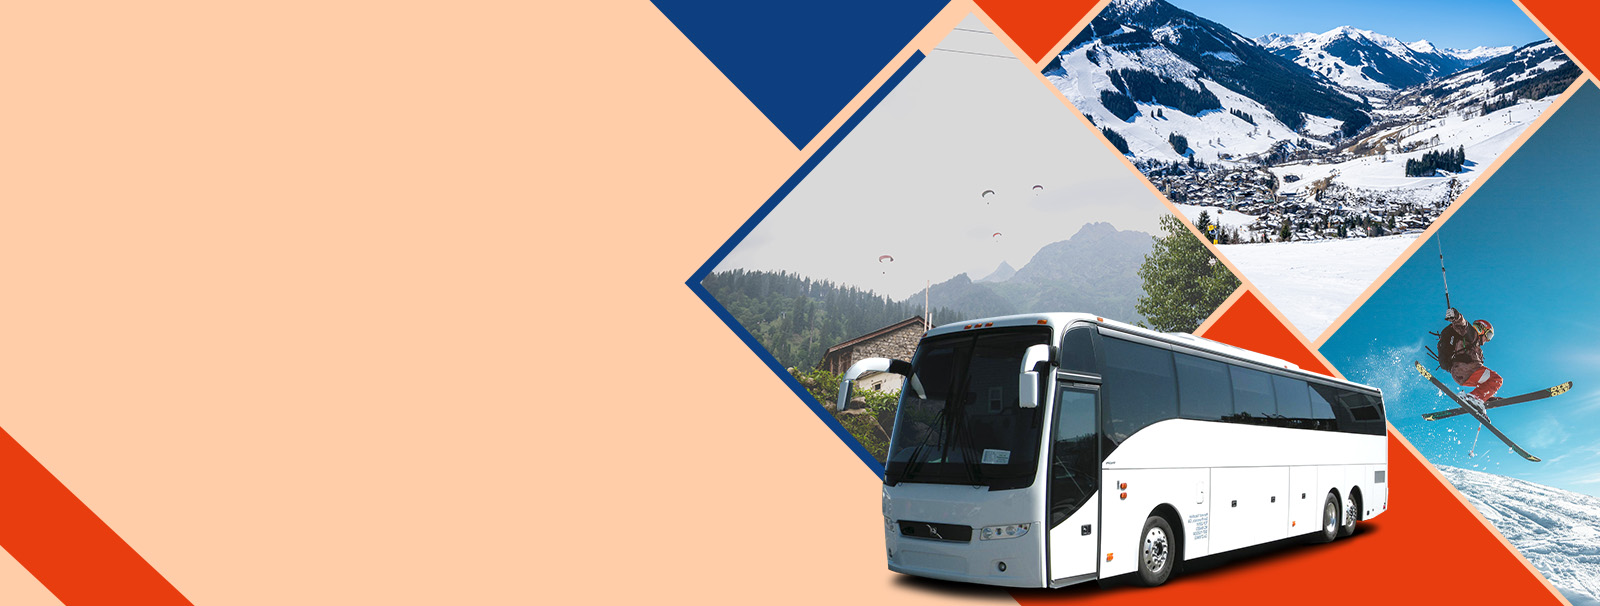 Manali Tour by Volvo from Delhi